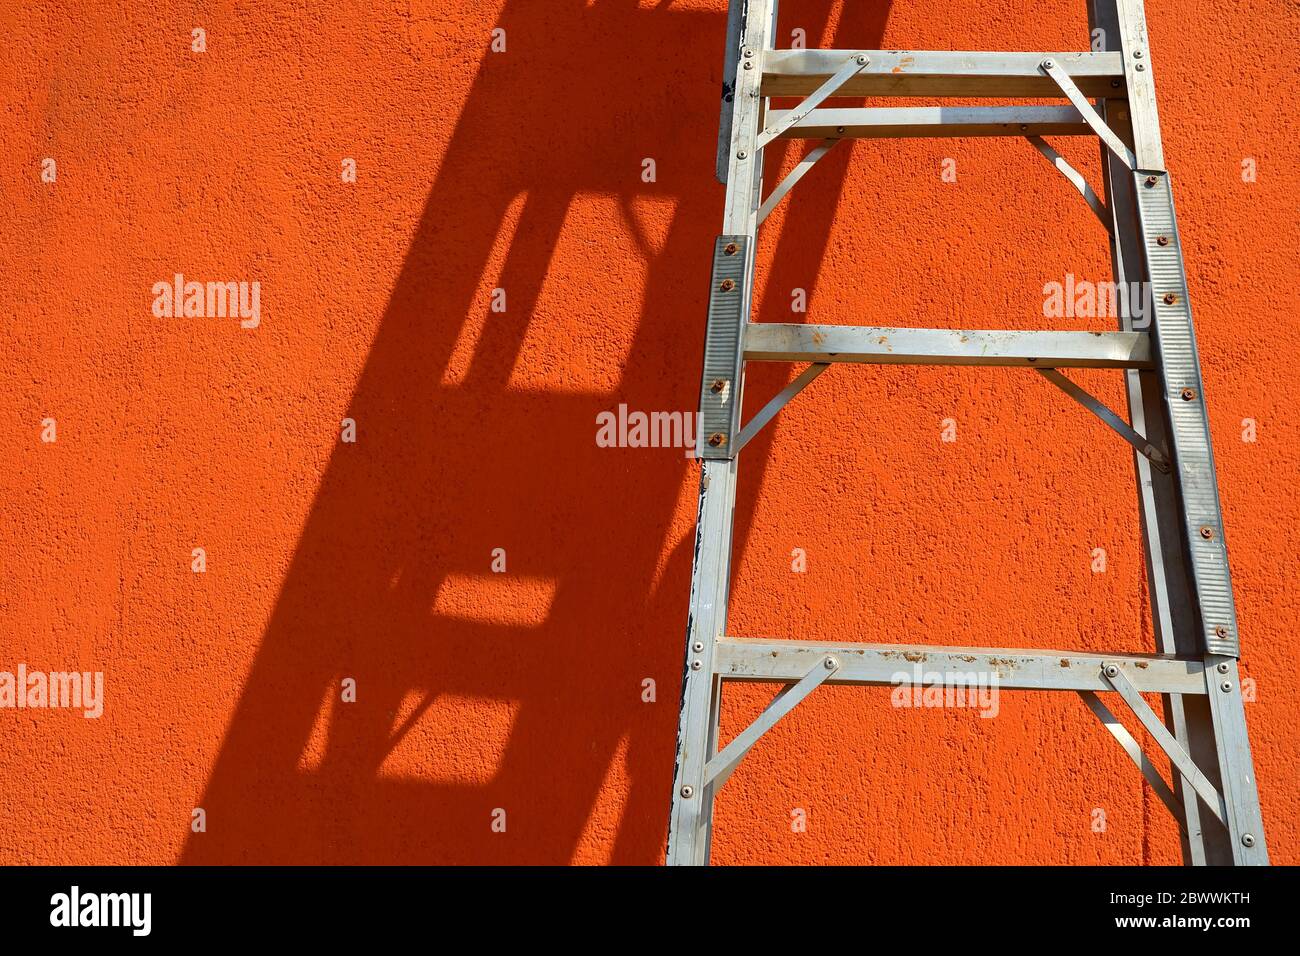 Stainless Ladder Leaning Against a Wall. Stock Photo